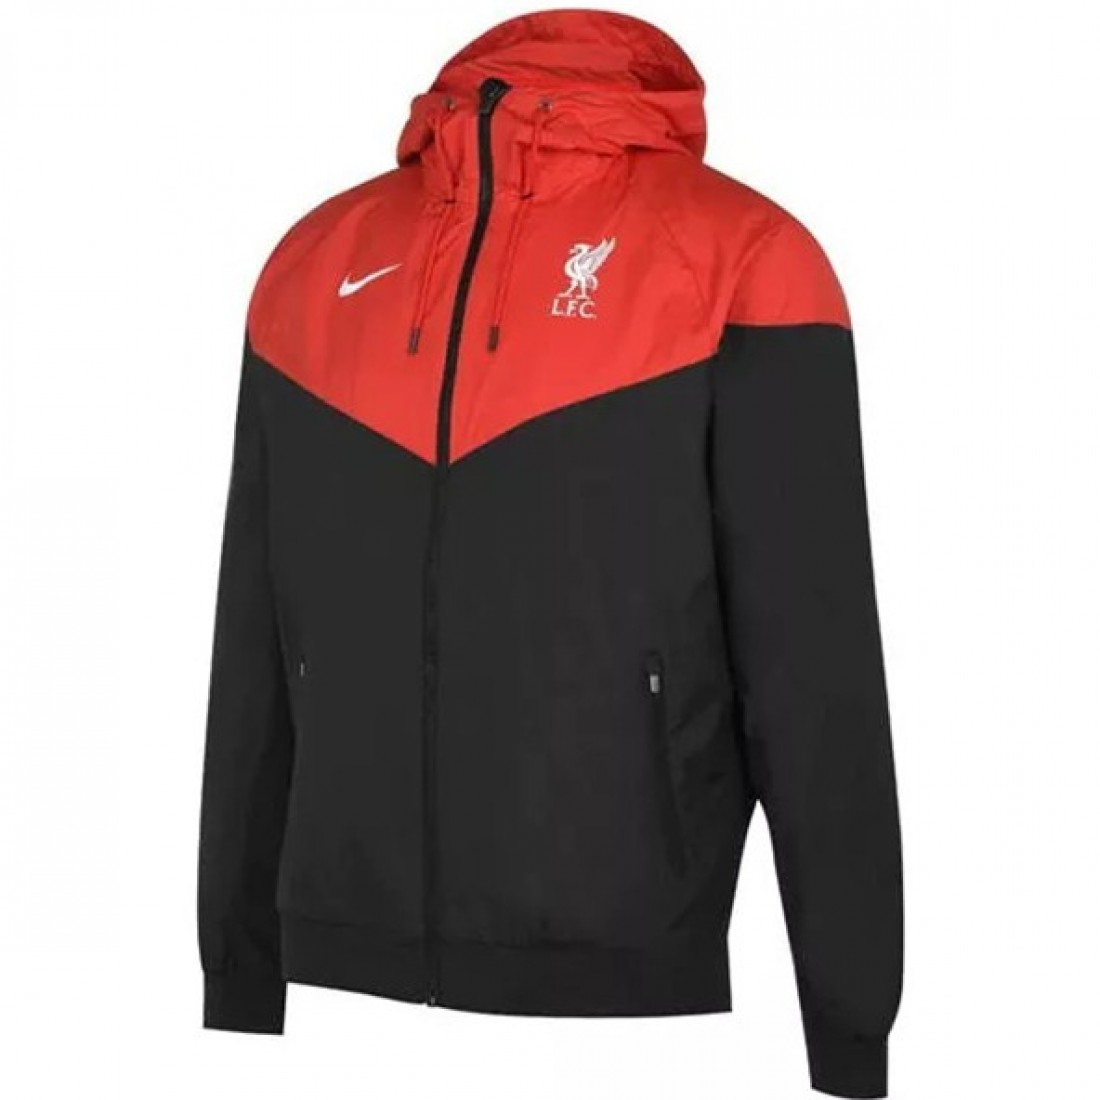 Sales Liverpool Windrunner Jacket 2020 2021 Up To 50% Off